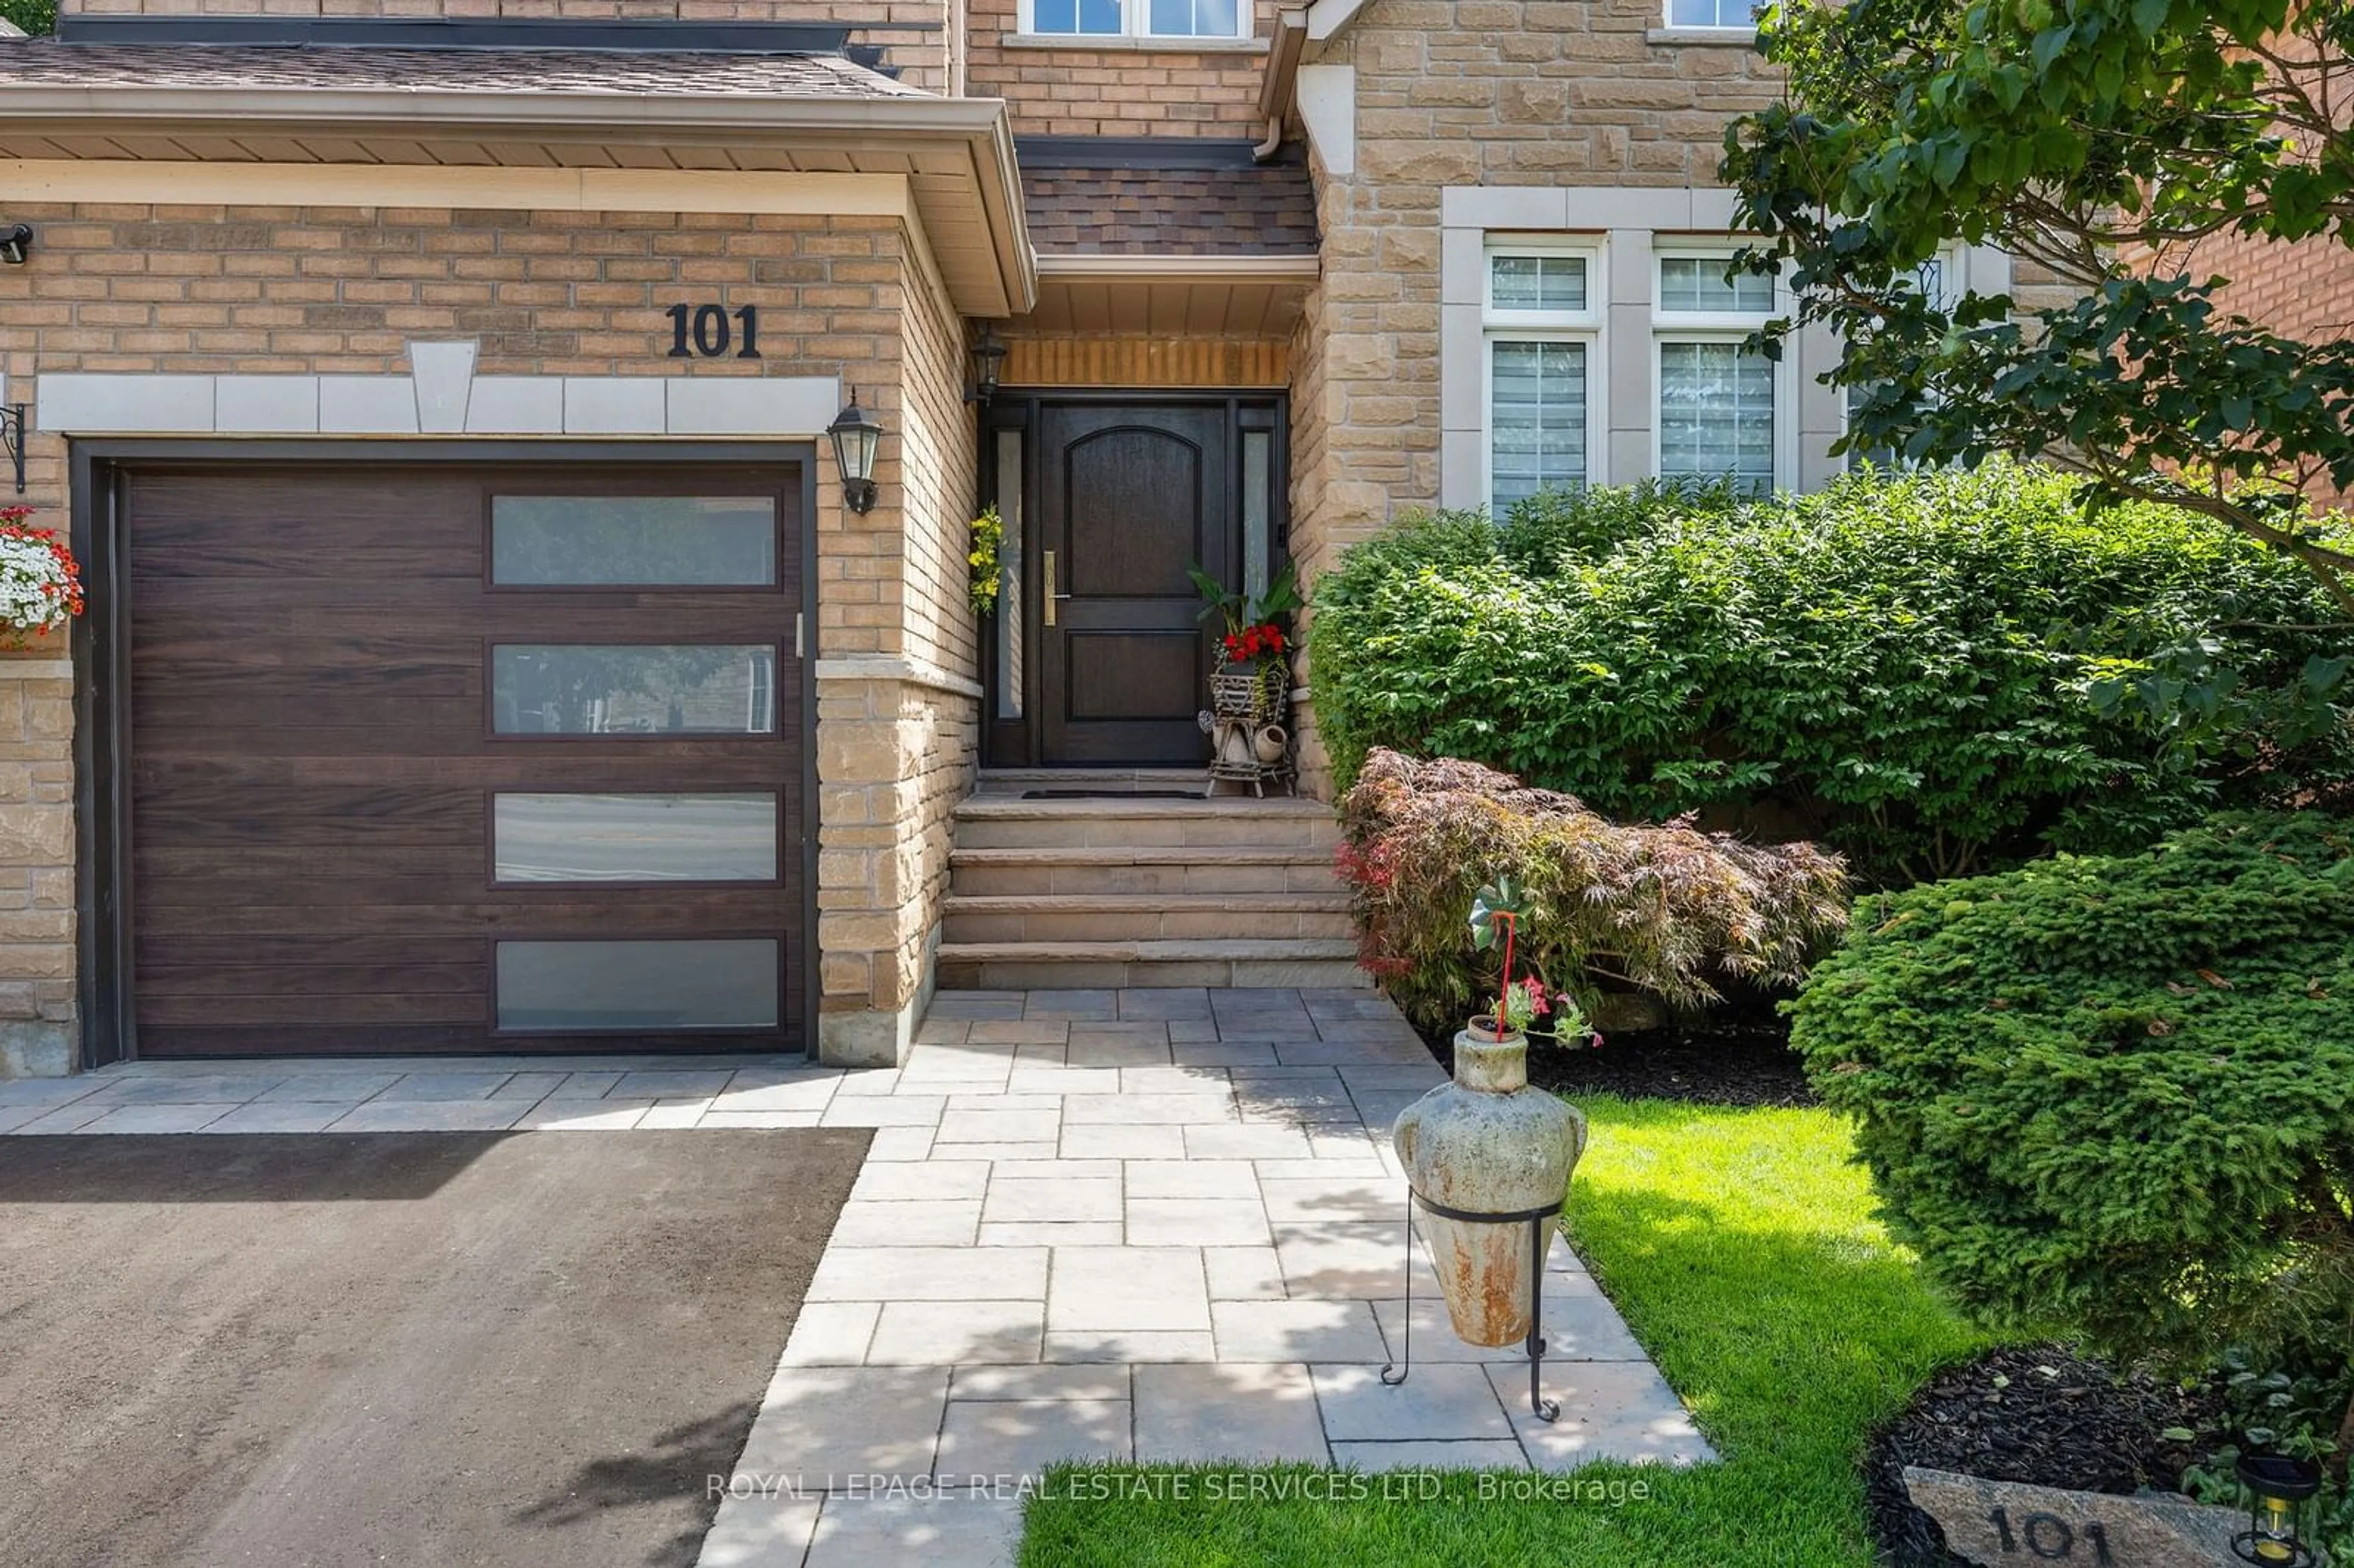 Home with brick exterior material for 101 Thornhill Woods Dr, Vaughan Ontario L4J 8R5